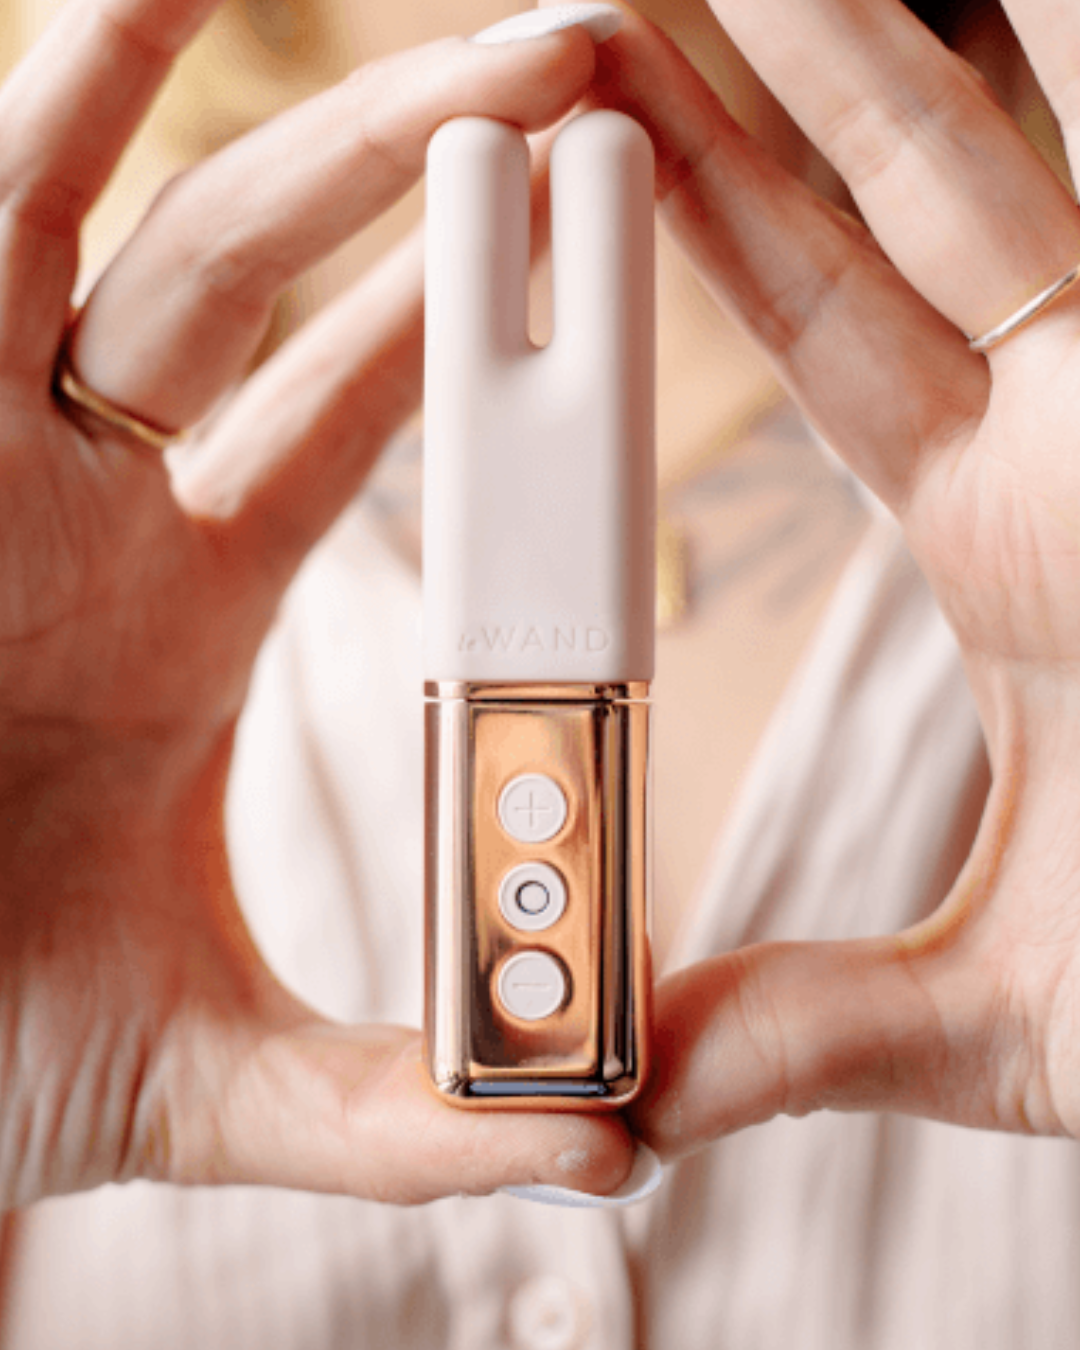 Le Wand Deux Twin Motor Rechargeable Waterproof Vibrator - Rose Gold held in two hands